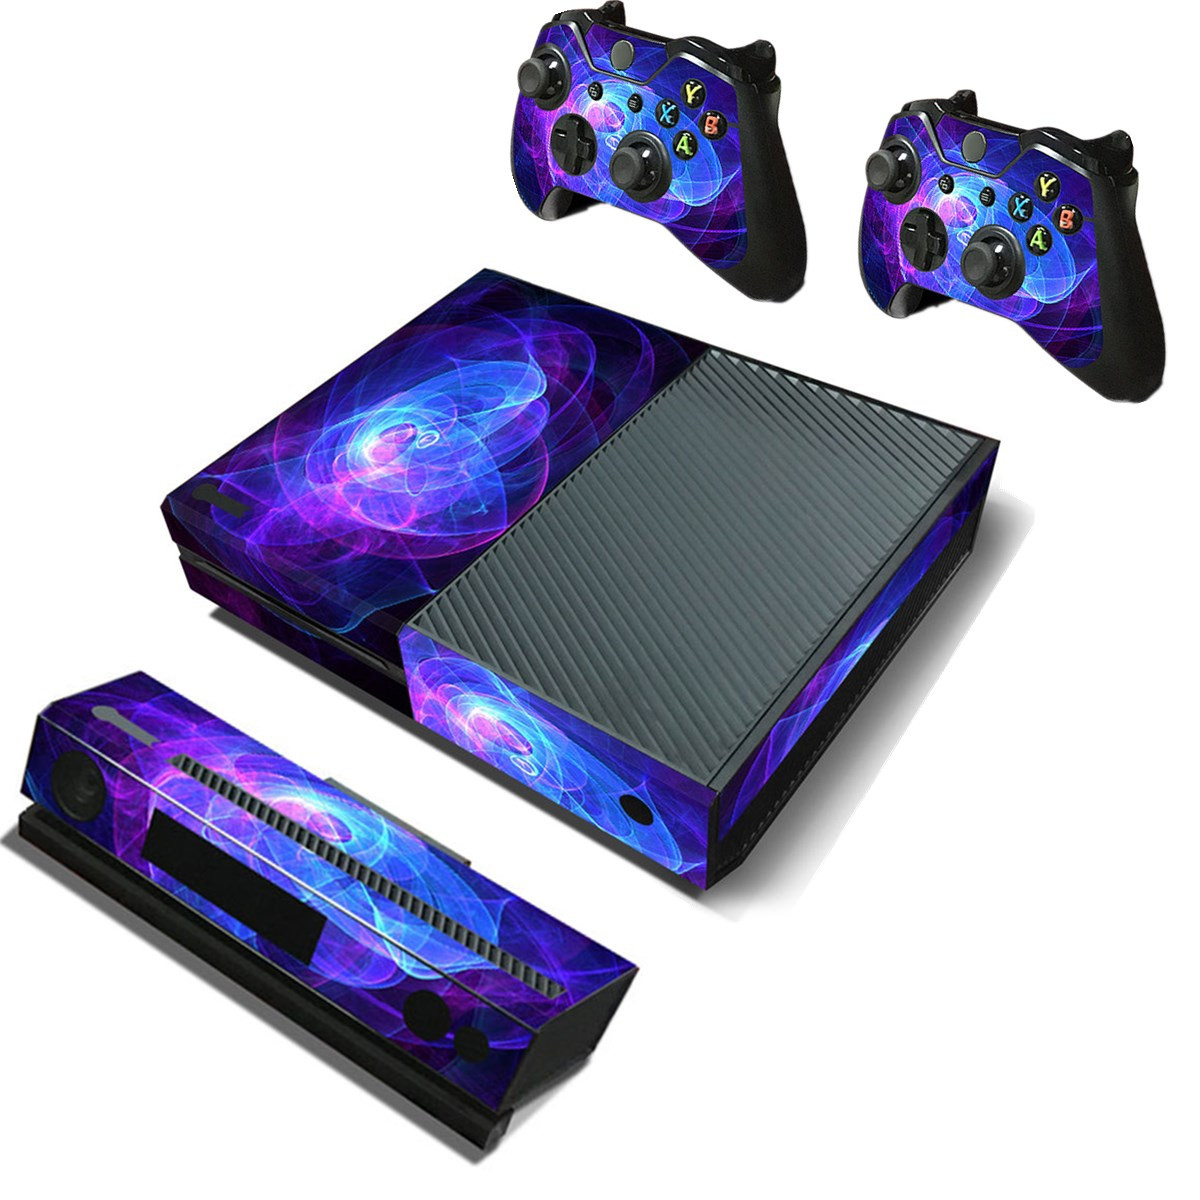 Purple Protective Vinyl Decal Skin Stickers Wrap Cover For Xbox One Game Console Game Controller Kinect 46